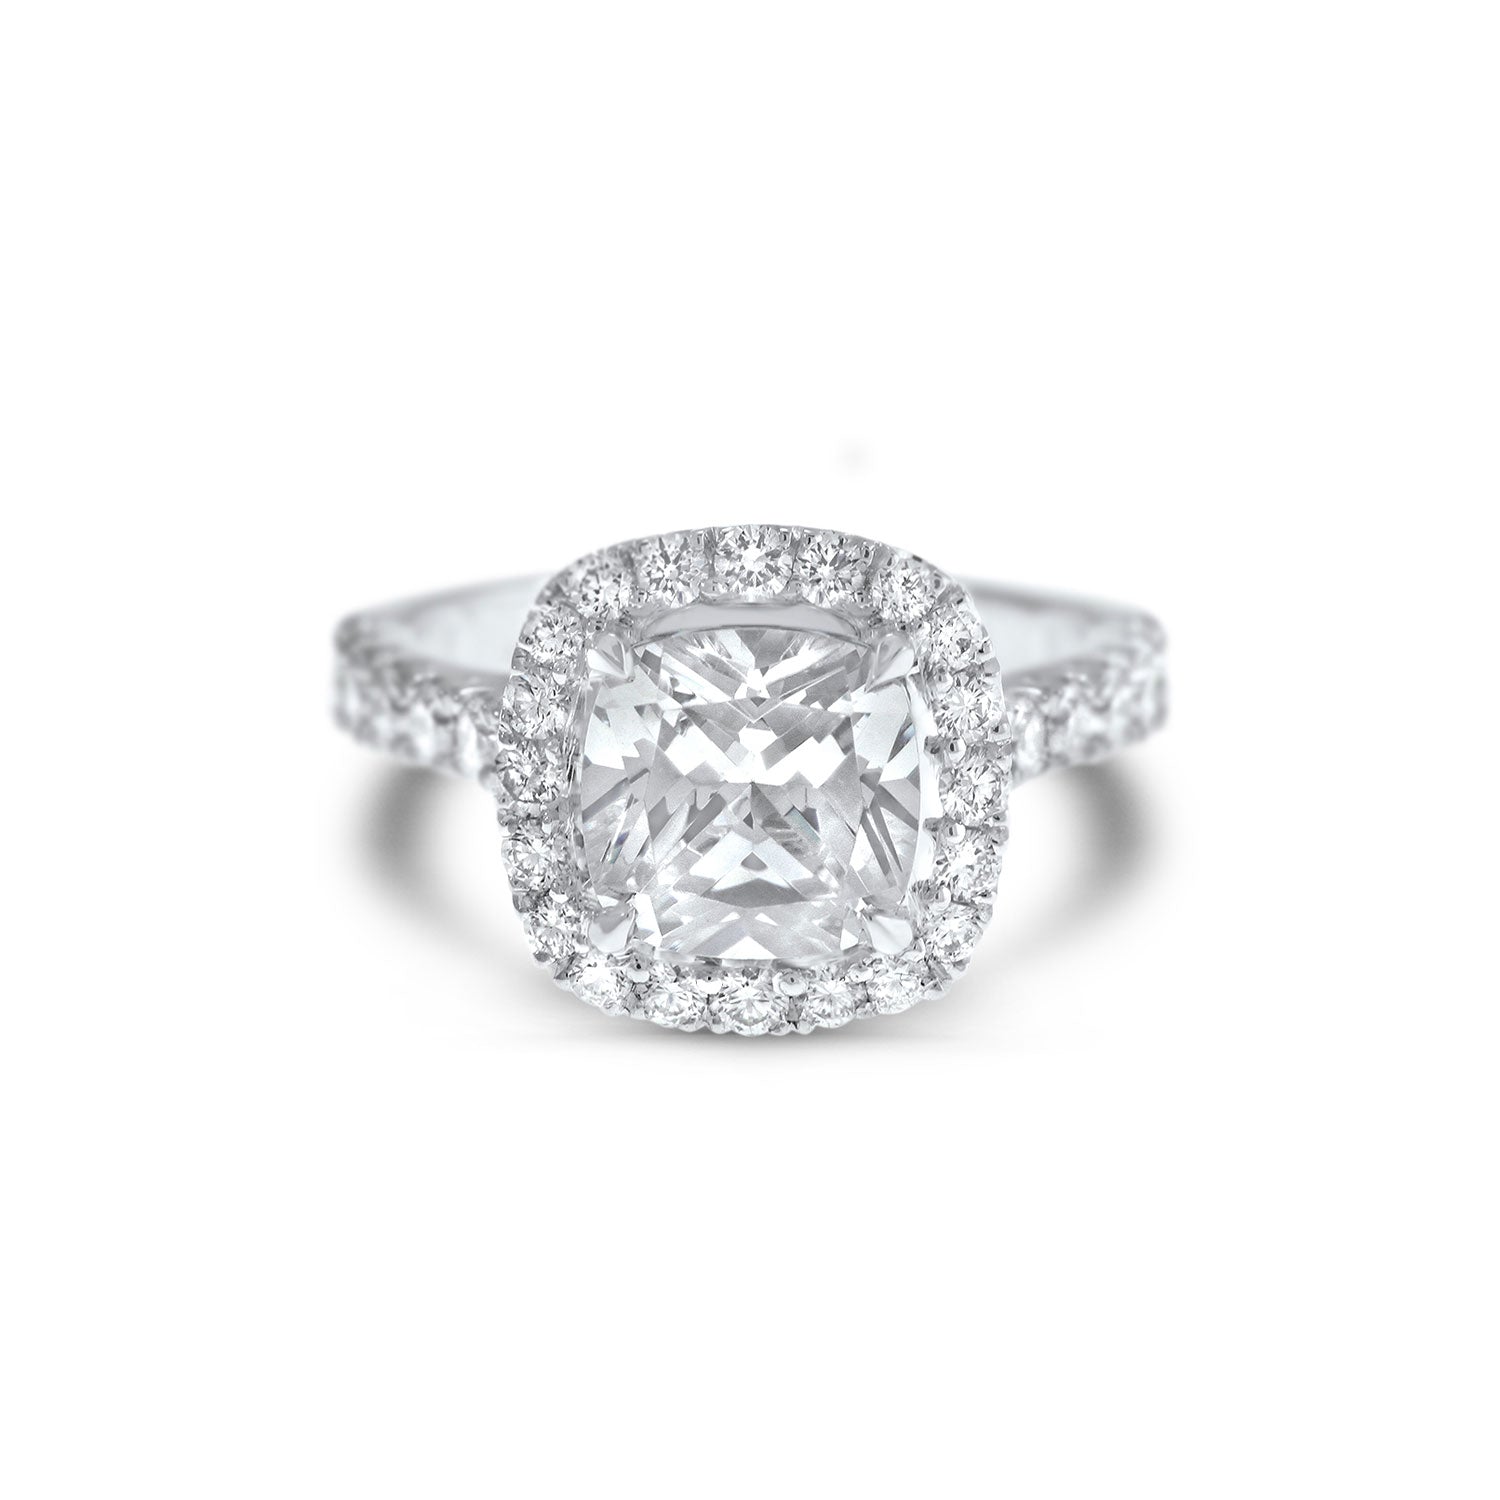 Cushion Cut Solitaire Diamond Halo Engagement Ring